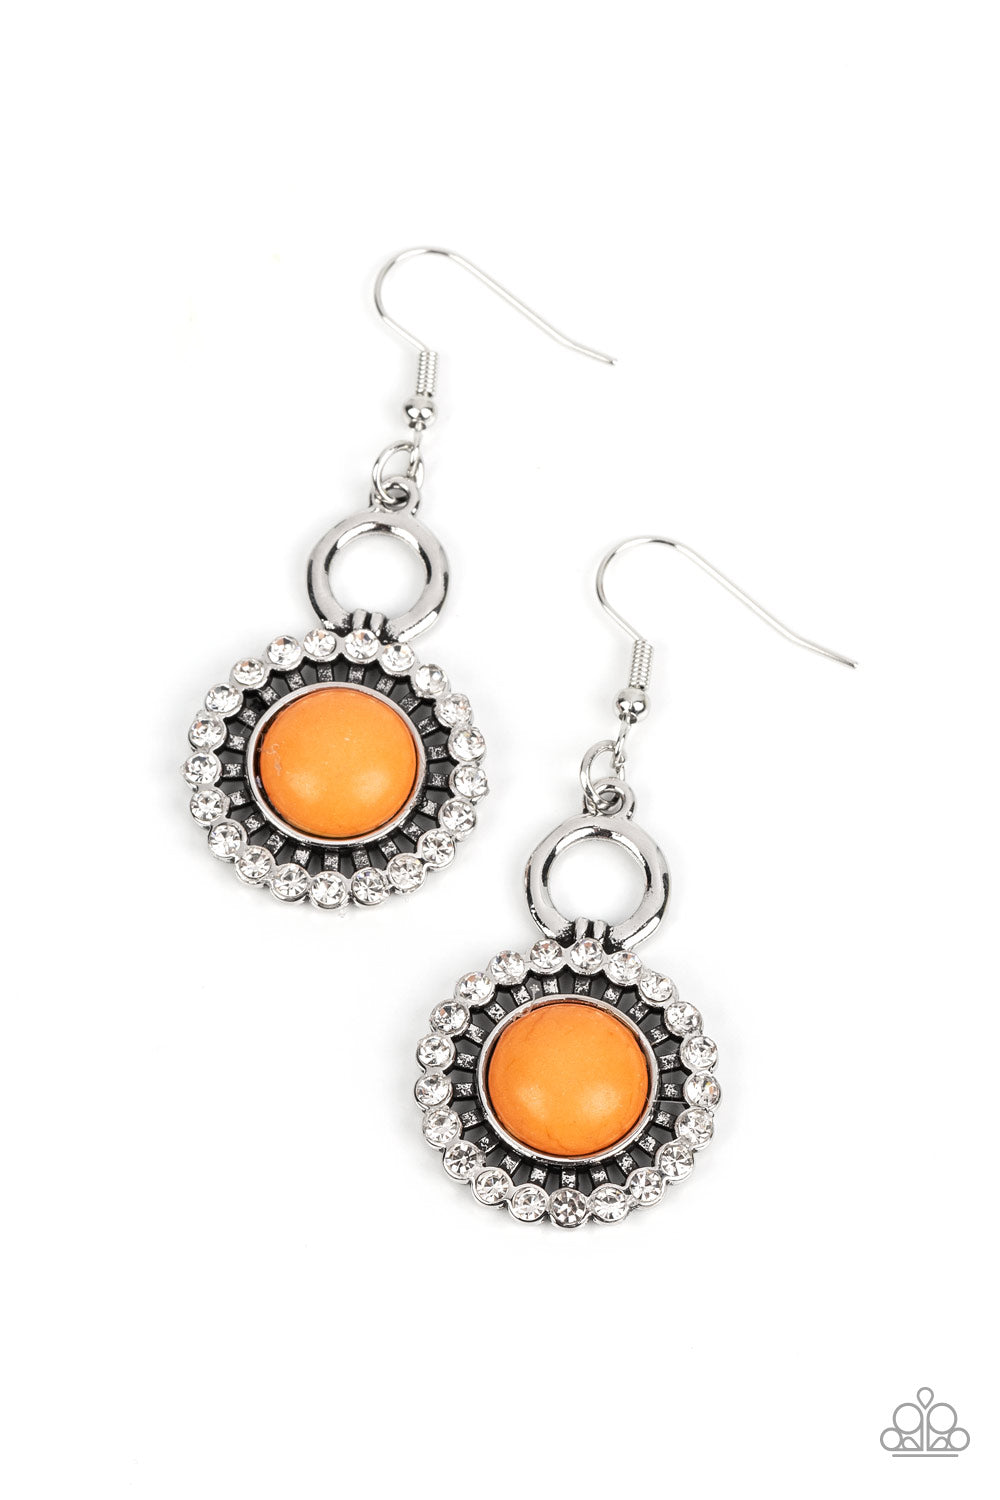 Mojave Mogul - Orange Crackle Stone and Silver Earrings - Paparazzi Accessories - a dainty circle of glassy white rhinestones fans out from an orange stone center, creating an artisan-inspired sparkle. Earring attaches to a standard fishhook fitting. - Trendy fashion jewelry for everyone -